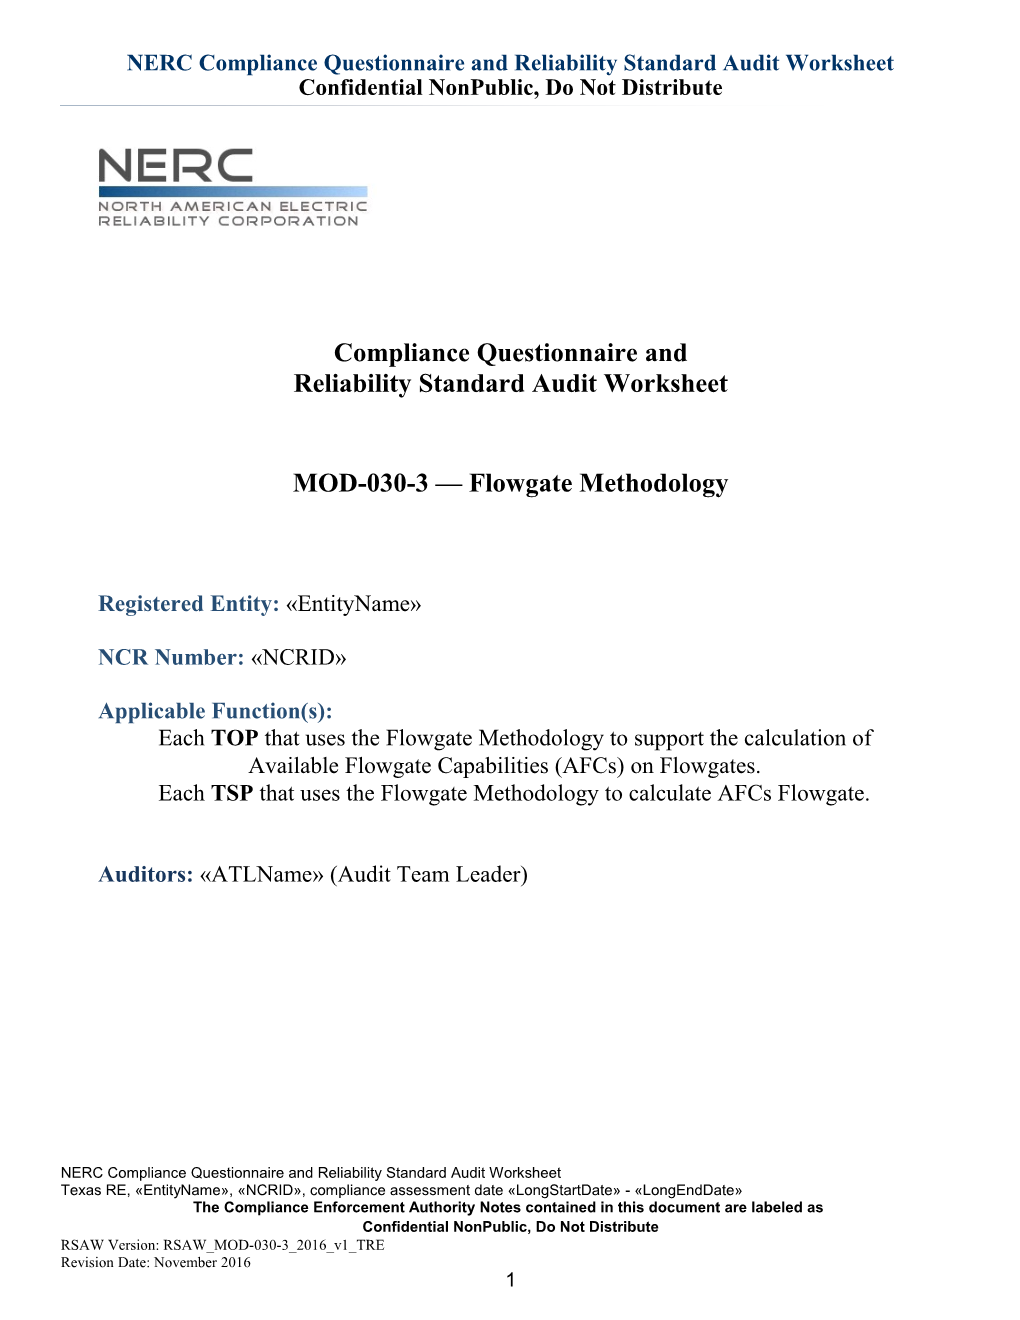 NERC Compliance Questionnaire and Reliability Standard Audit Worksheet